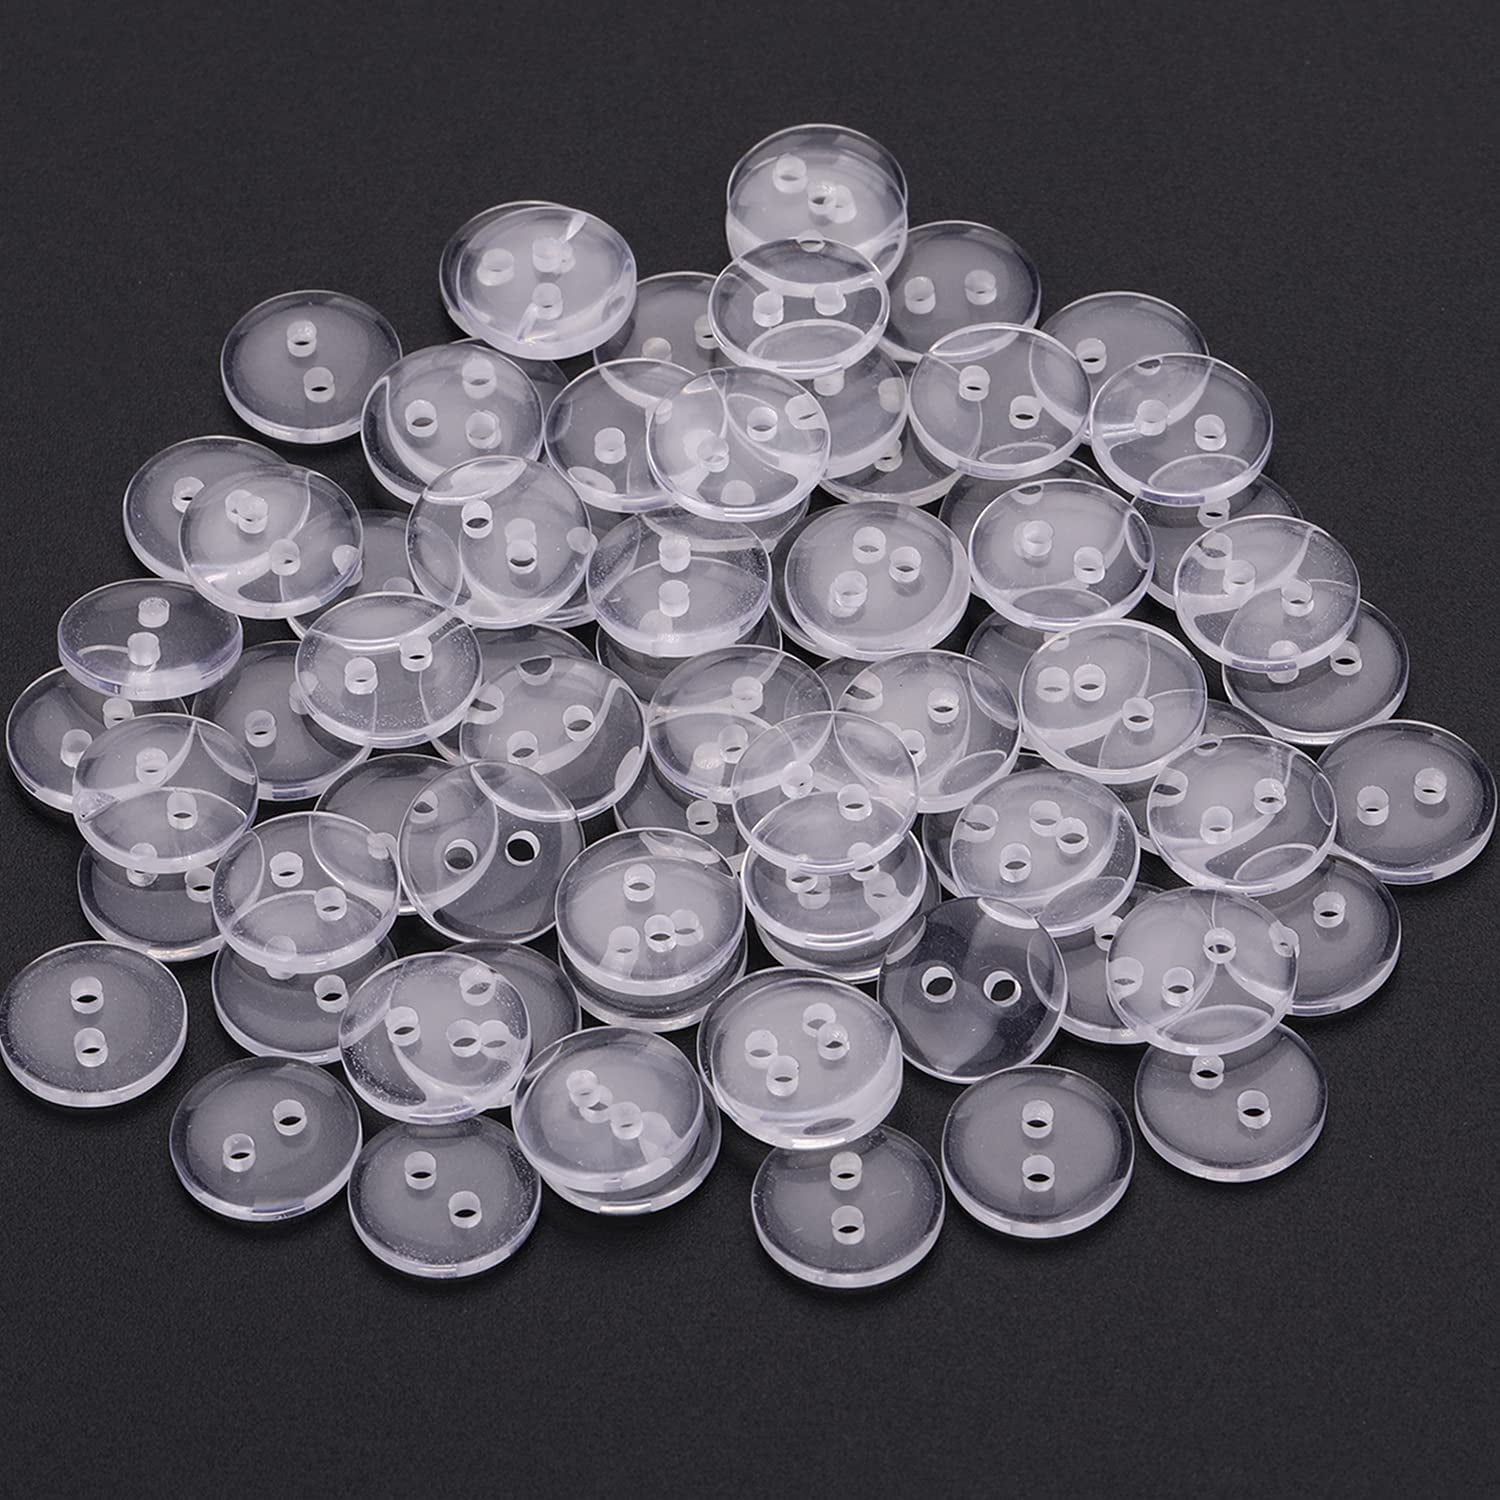  WedDecor 15mm Clear Plastic Round Buttons with 4 Holes